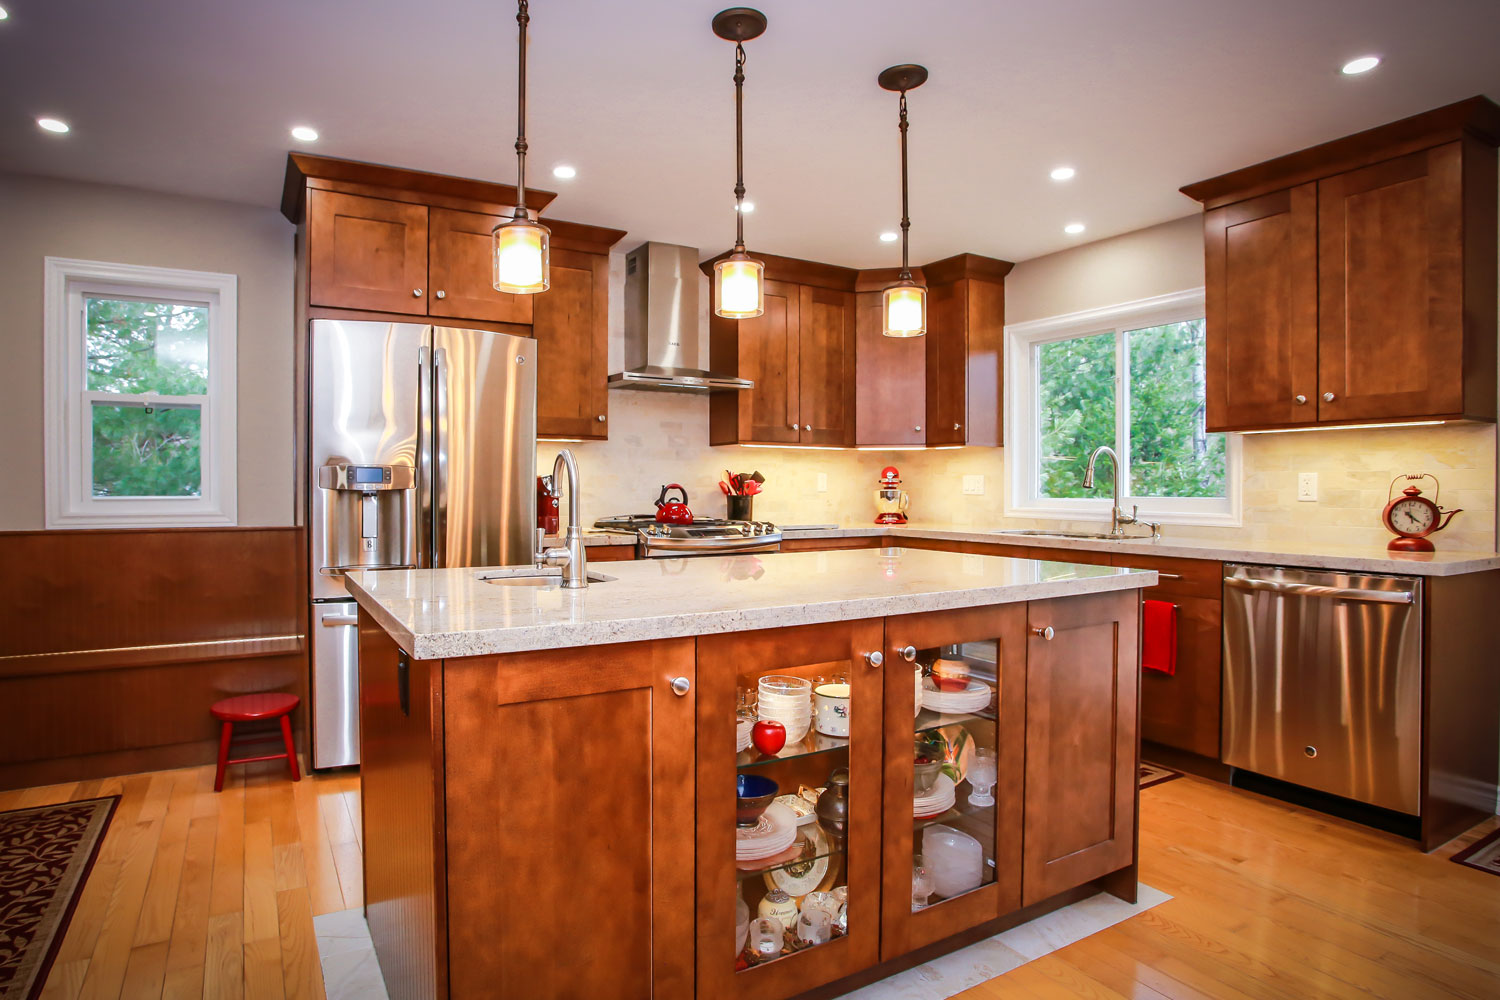 Kitchen cabinetry that includes a china cabinet display